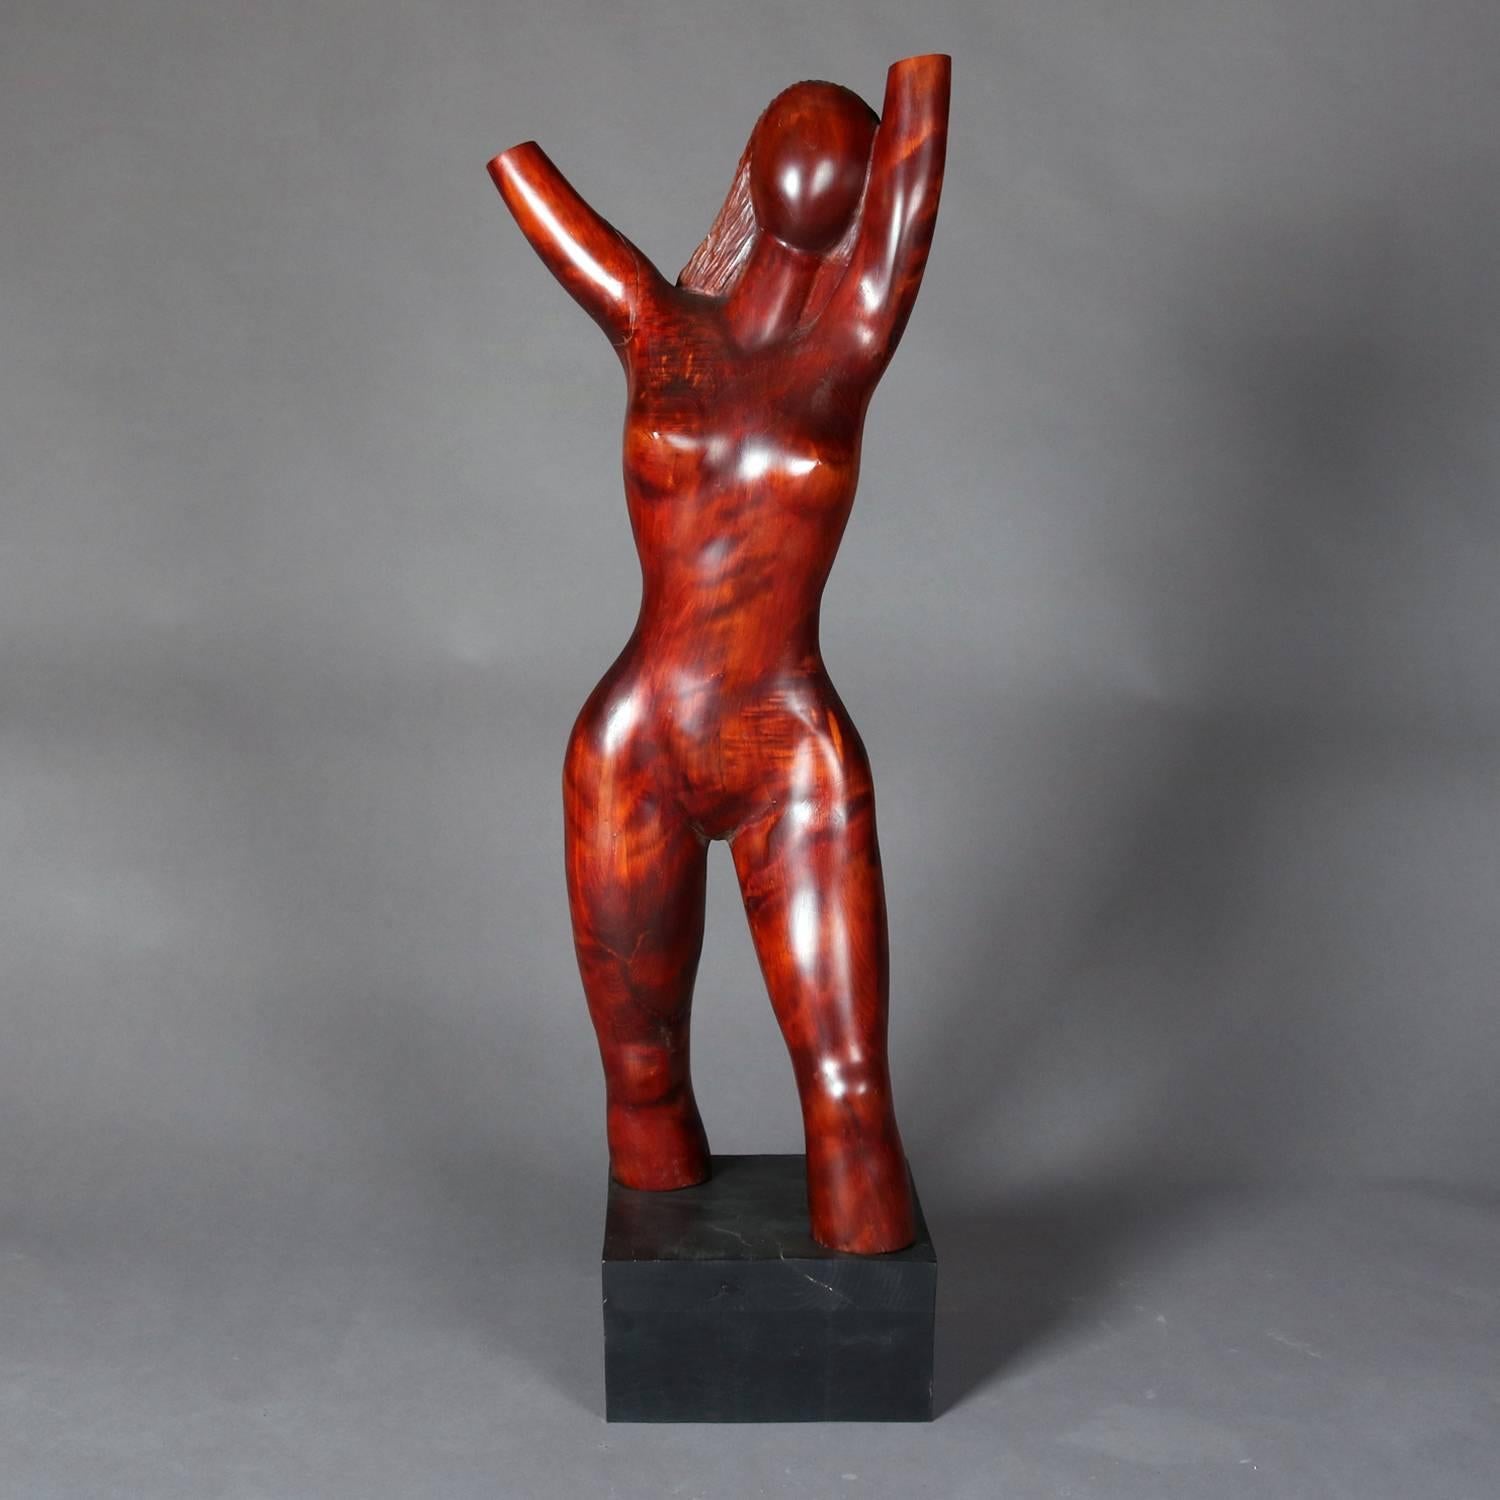 Mid Century Modern figural carved wood sculpture depicts nude female torso on ebonized base, mid 20th century

Measures - 38.5"h x 12"w x 9.5"d